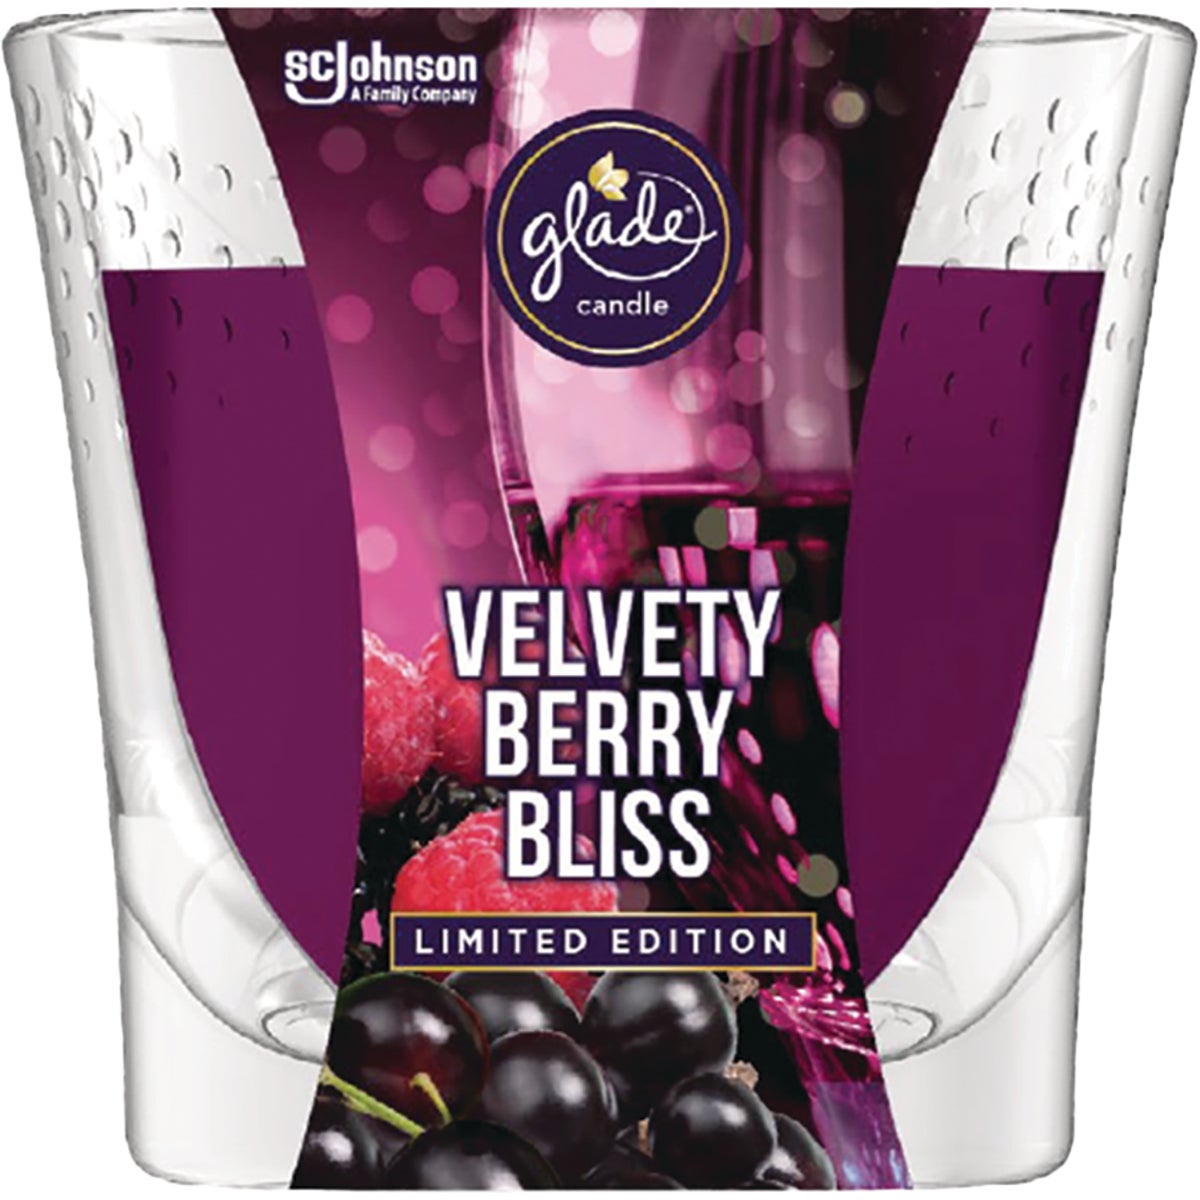 Glade 3.4 Oz. Velvety Berry Bliss Candle